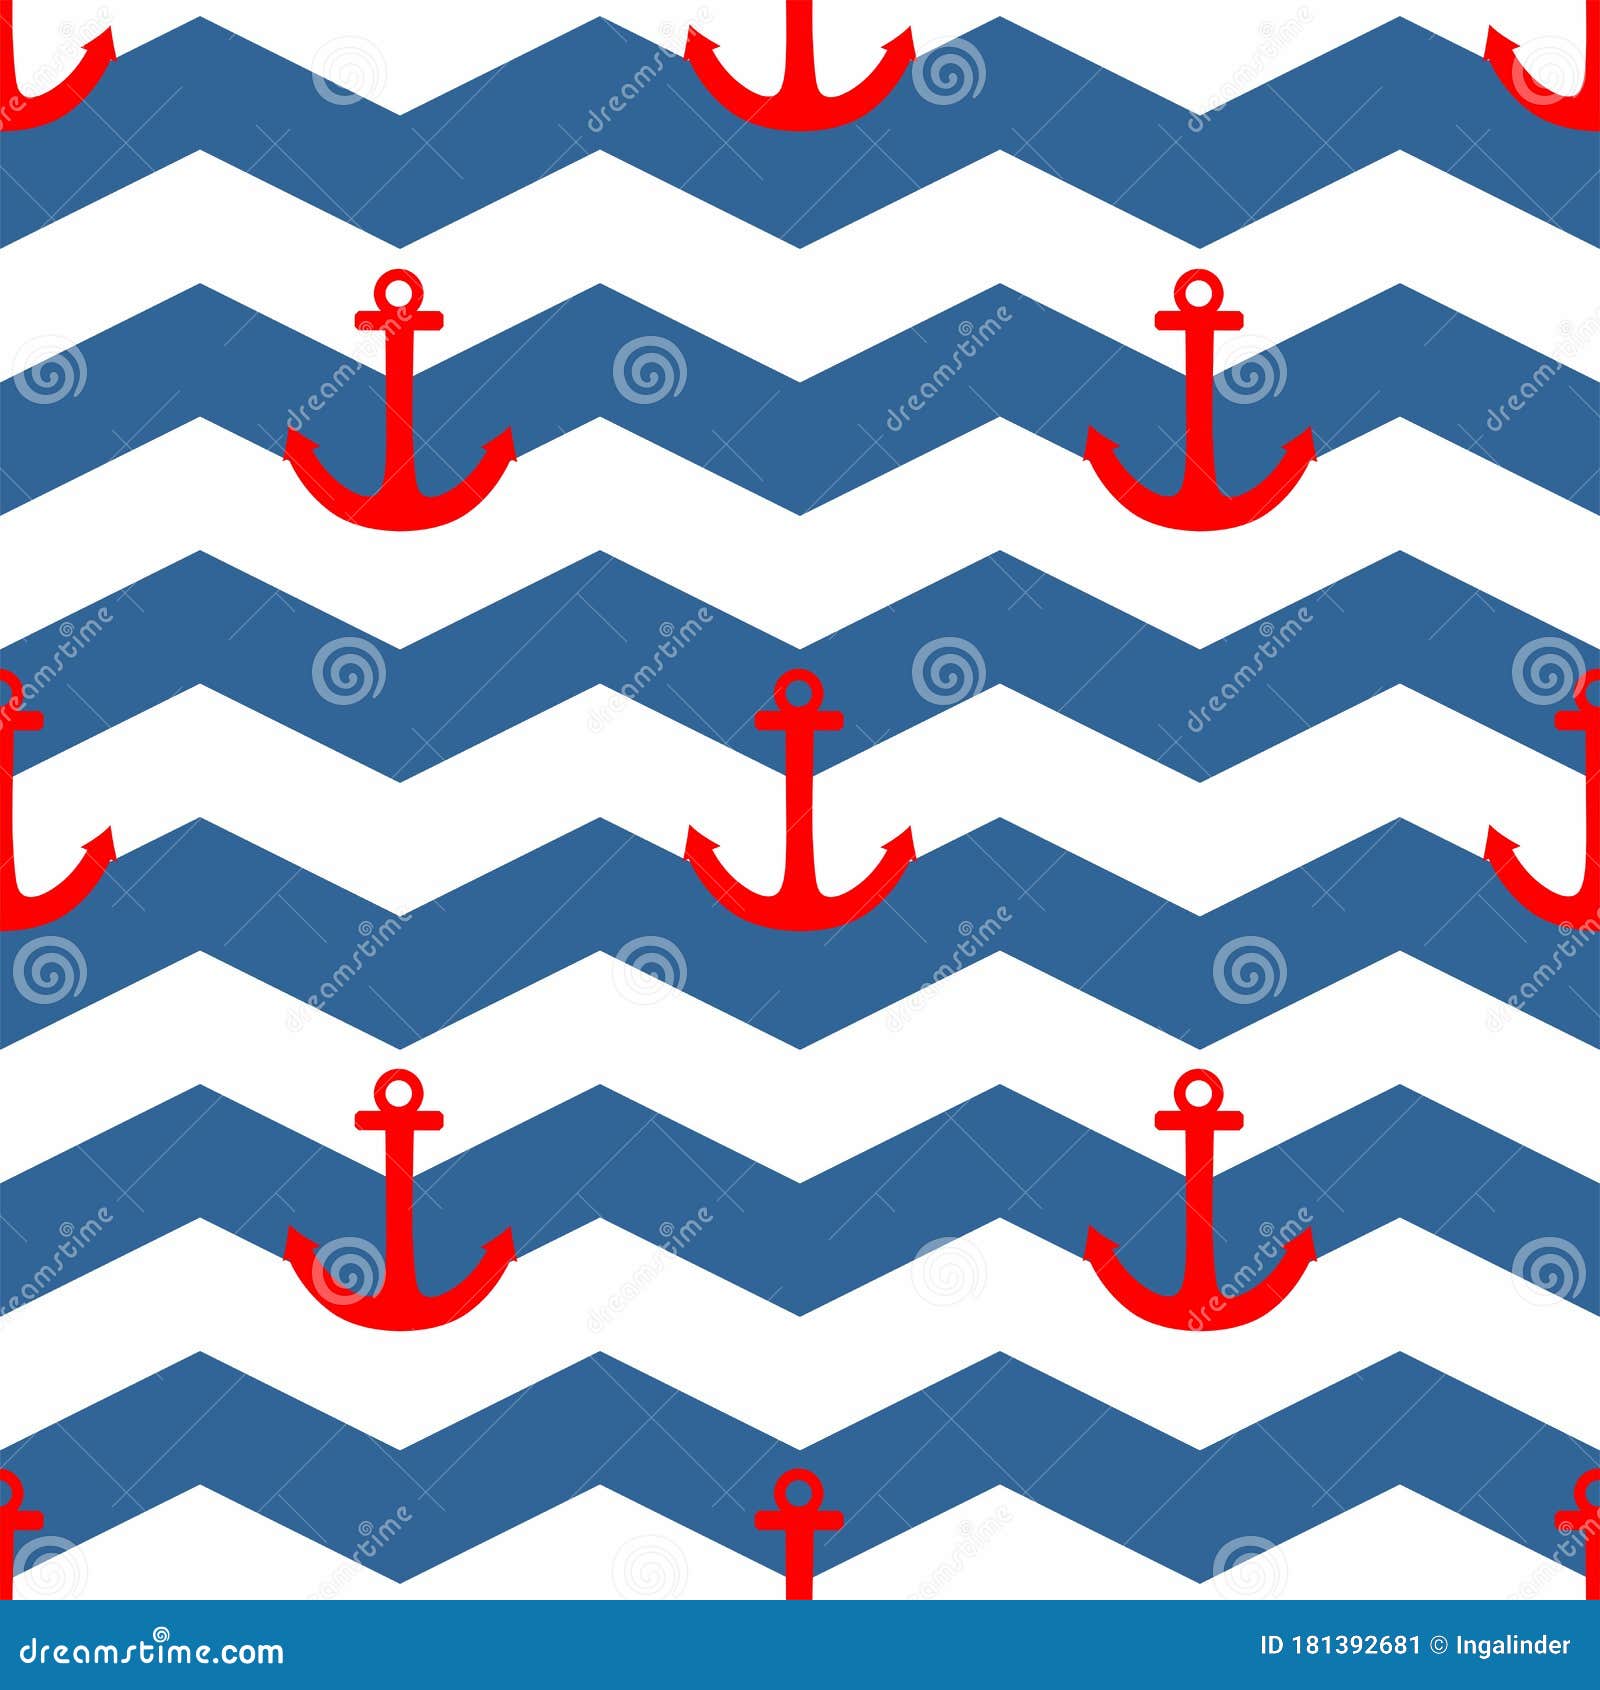 tile sailor  pattern with red anchor on white and blue stripes background